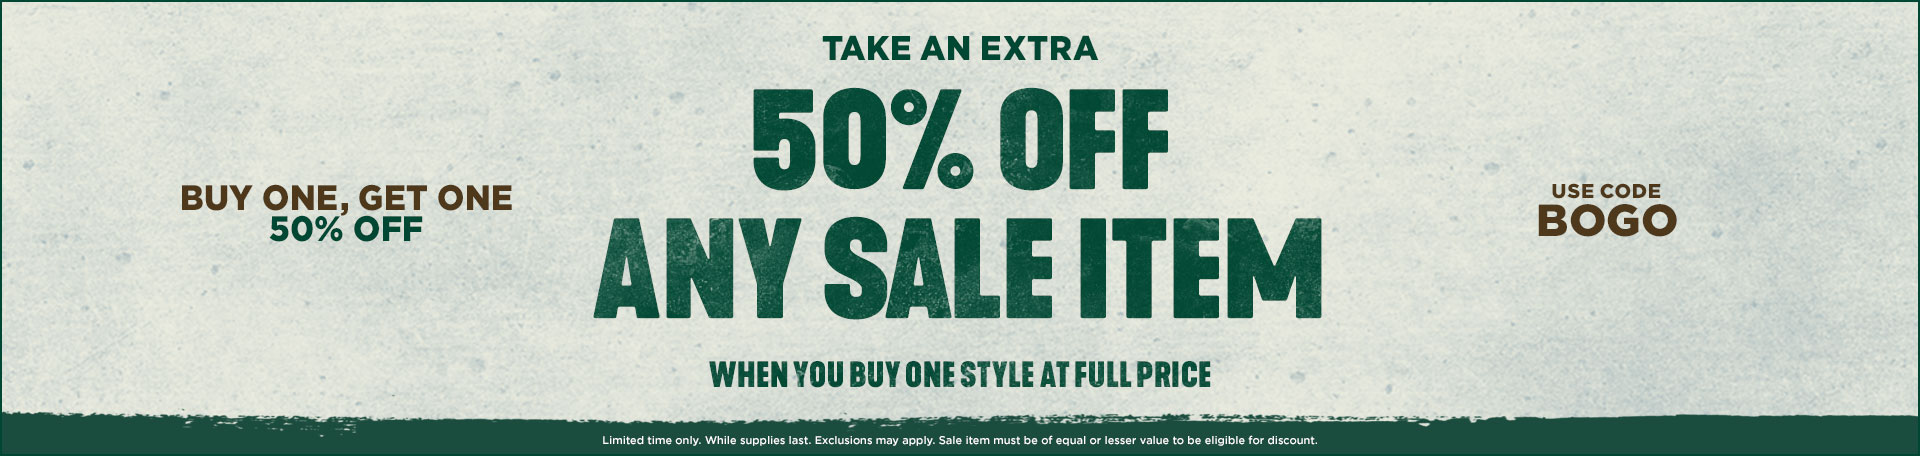 Buy one get one 50 percent off. Take an extra 50% off any sale item when you buy one style at full price use code BOGO